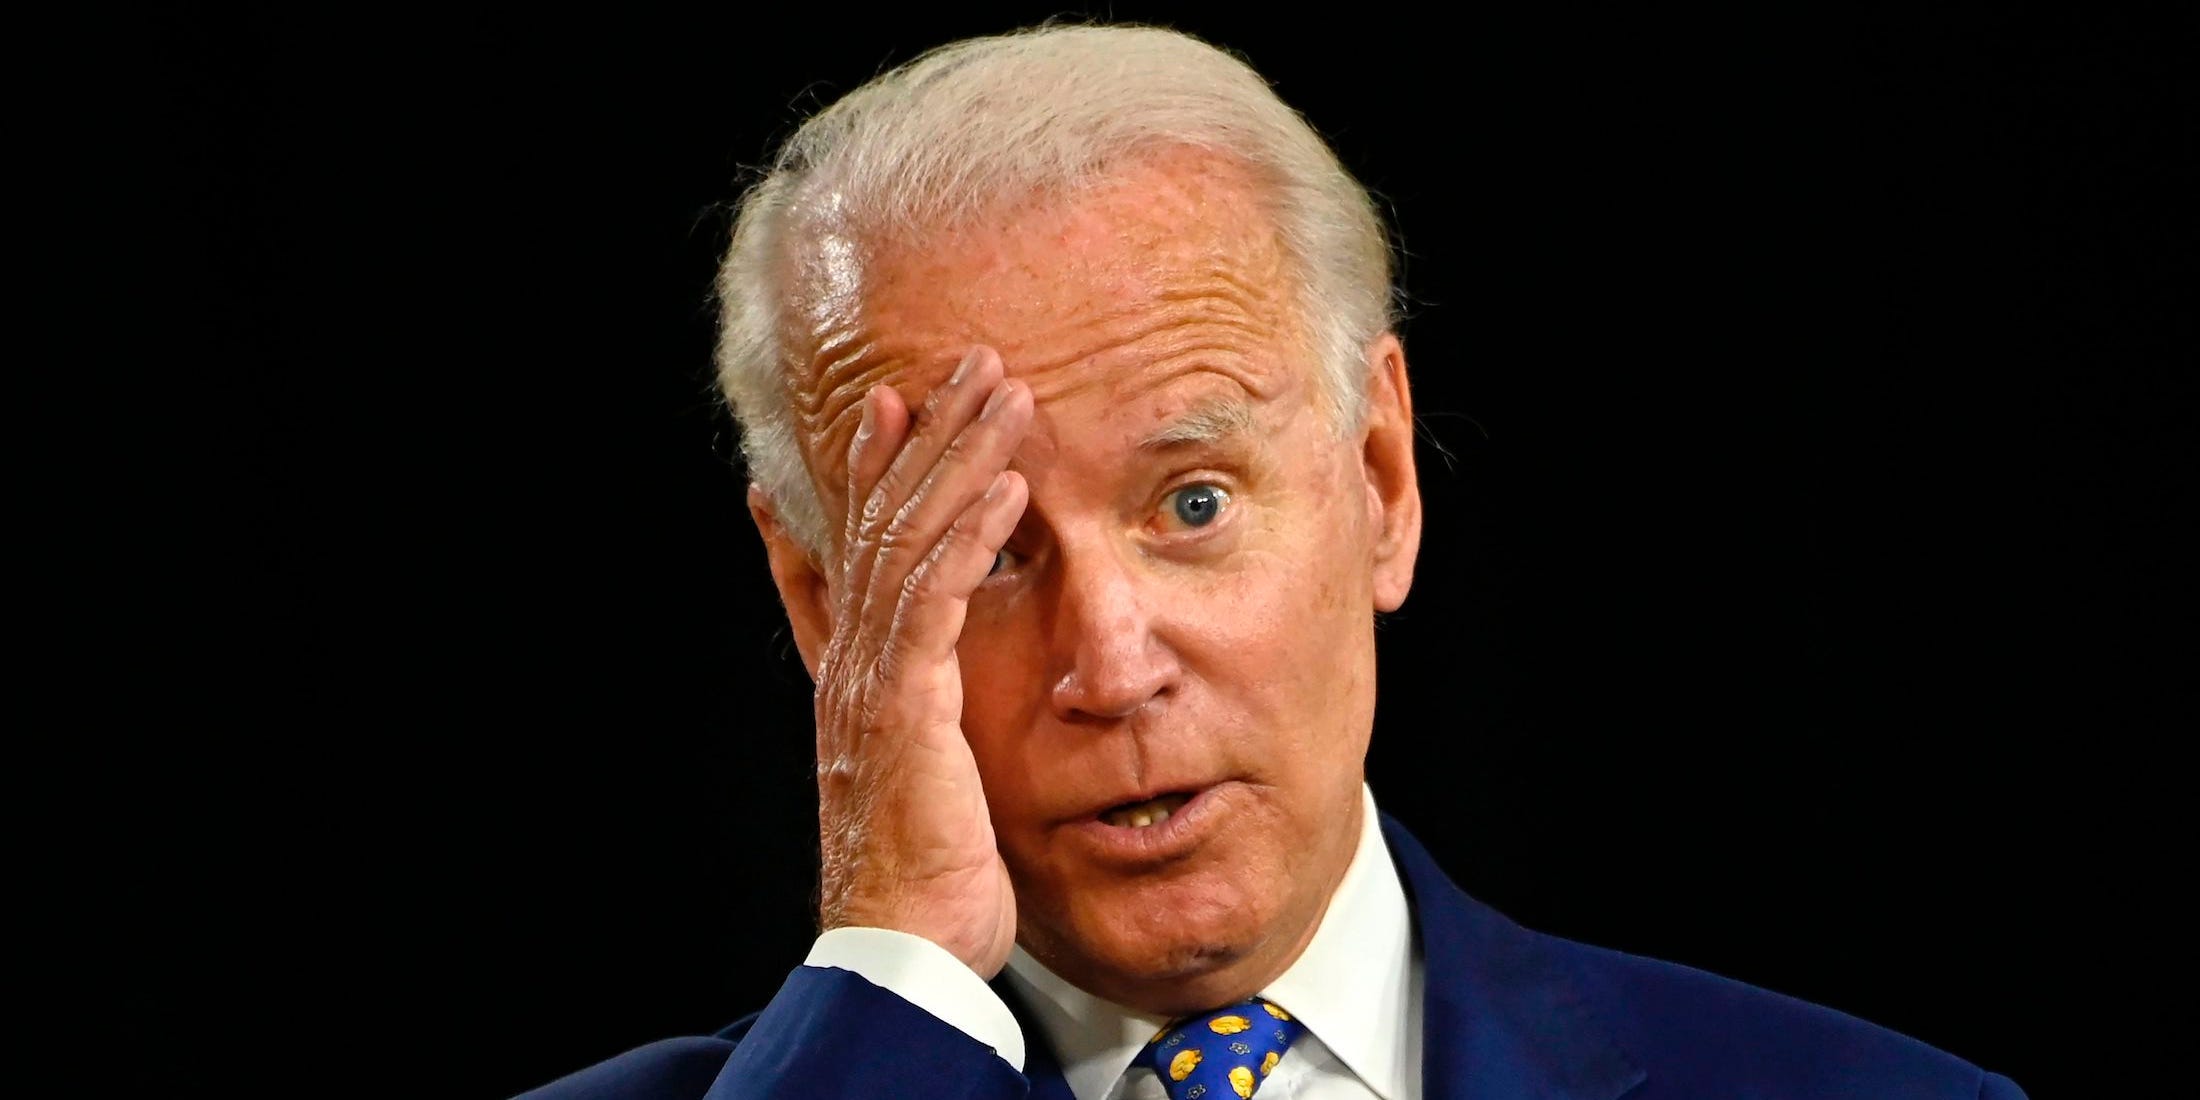 The Biden Disaster, Part 1: Critics say the open border, the inflation surge and endless debt show President Biden is incapable of governing at age 78.